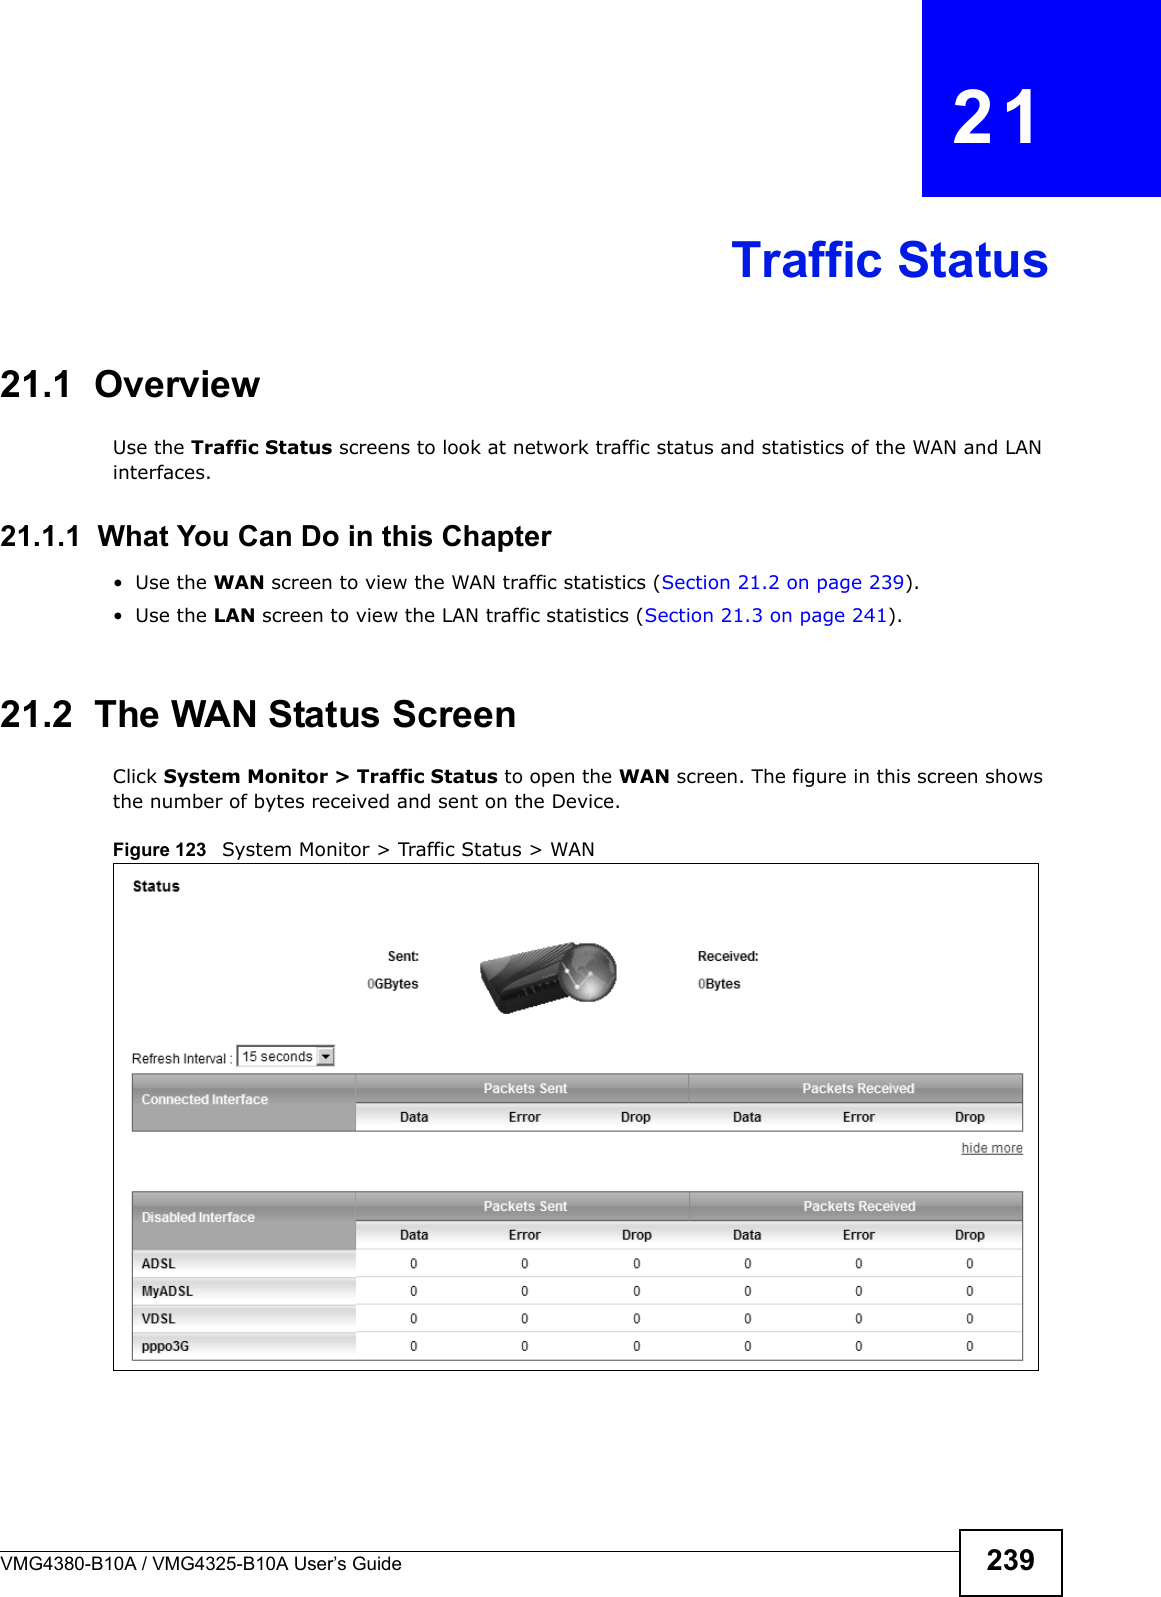 VMG4380-B10A / VMG4325-B10A User’s Guide 239CHAPTER  21Traffic Status21.1  OverviewUse the Traffic Status screens to look at network traffic status and statistics of the WAN and LAN interfaces. 21.1.1  What You Can Do in this Chapter• Use the WAN screen to view the WAN traffic statistics (Section 21.2 on page 239).• Use the LAN screen to view the LAN traffic statistics (Section 21.3 on page 241).21.2  The WAN Status Screen Click System Monitor &gt; Traffic Status to open the WAN screen. The figure in this screen shows the number of bytes received and sent on the Device.Figure 123  System Monitor &gt; Traffic Status &gt; WAN